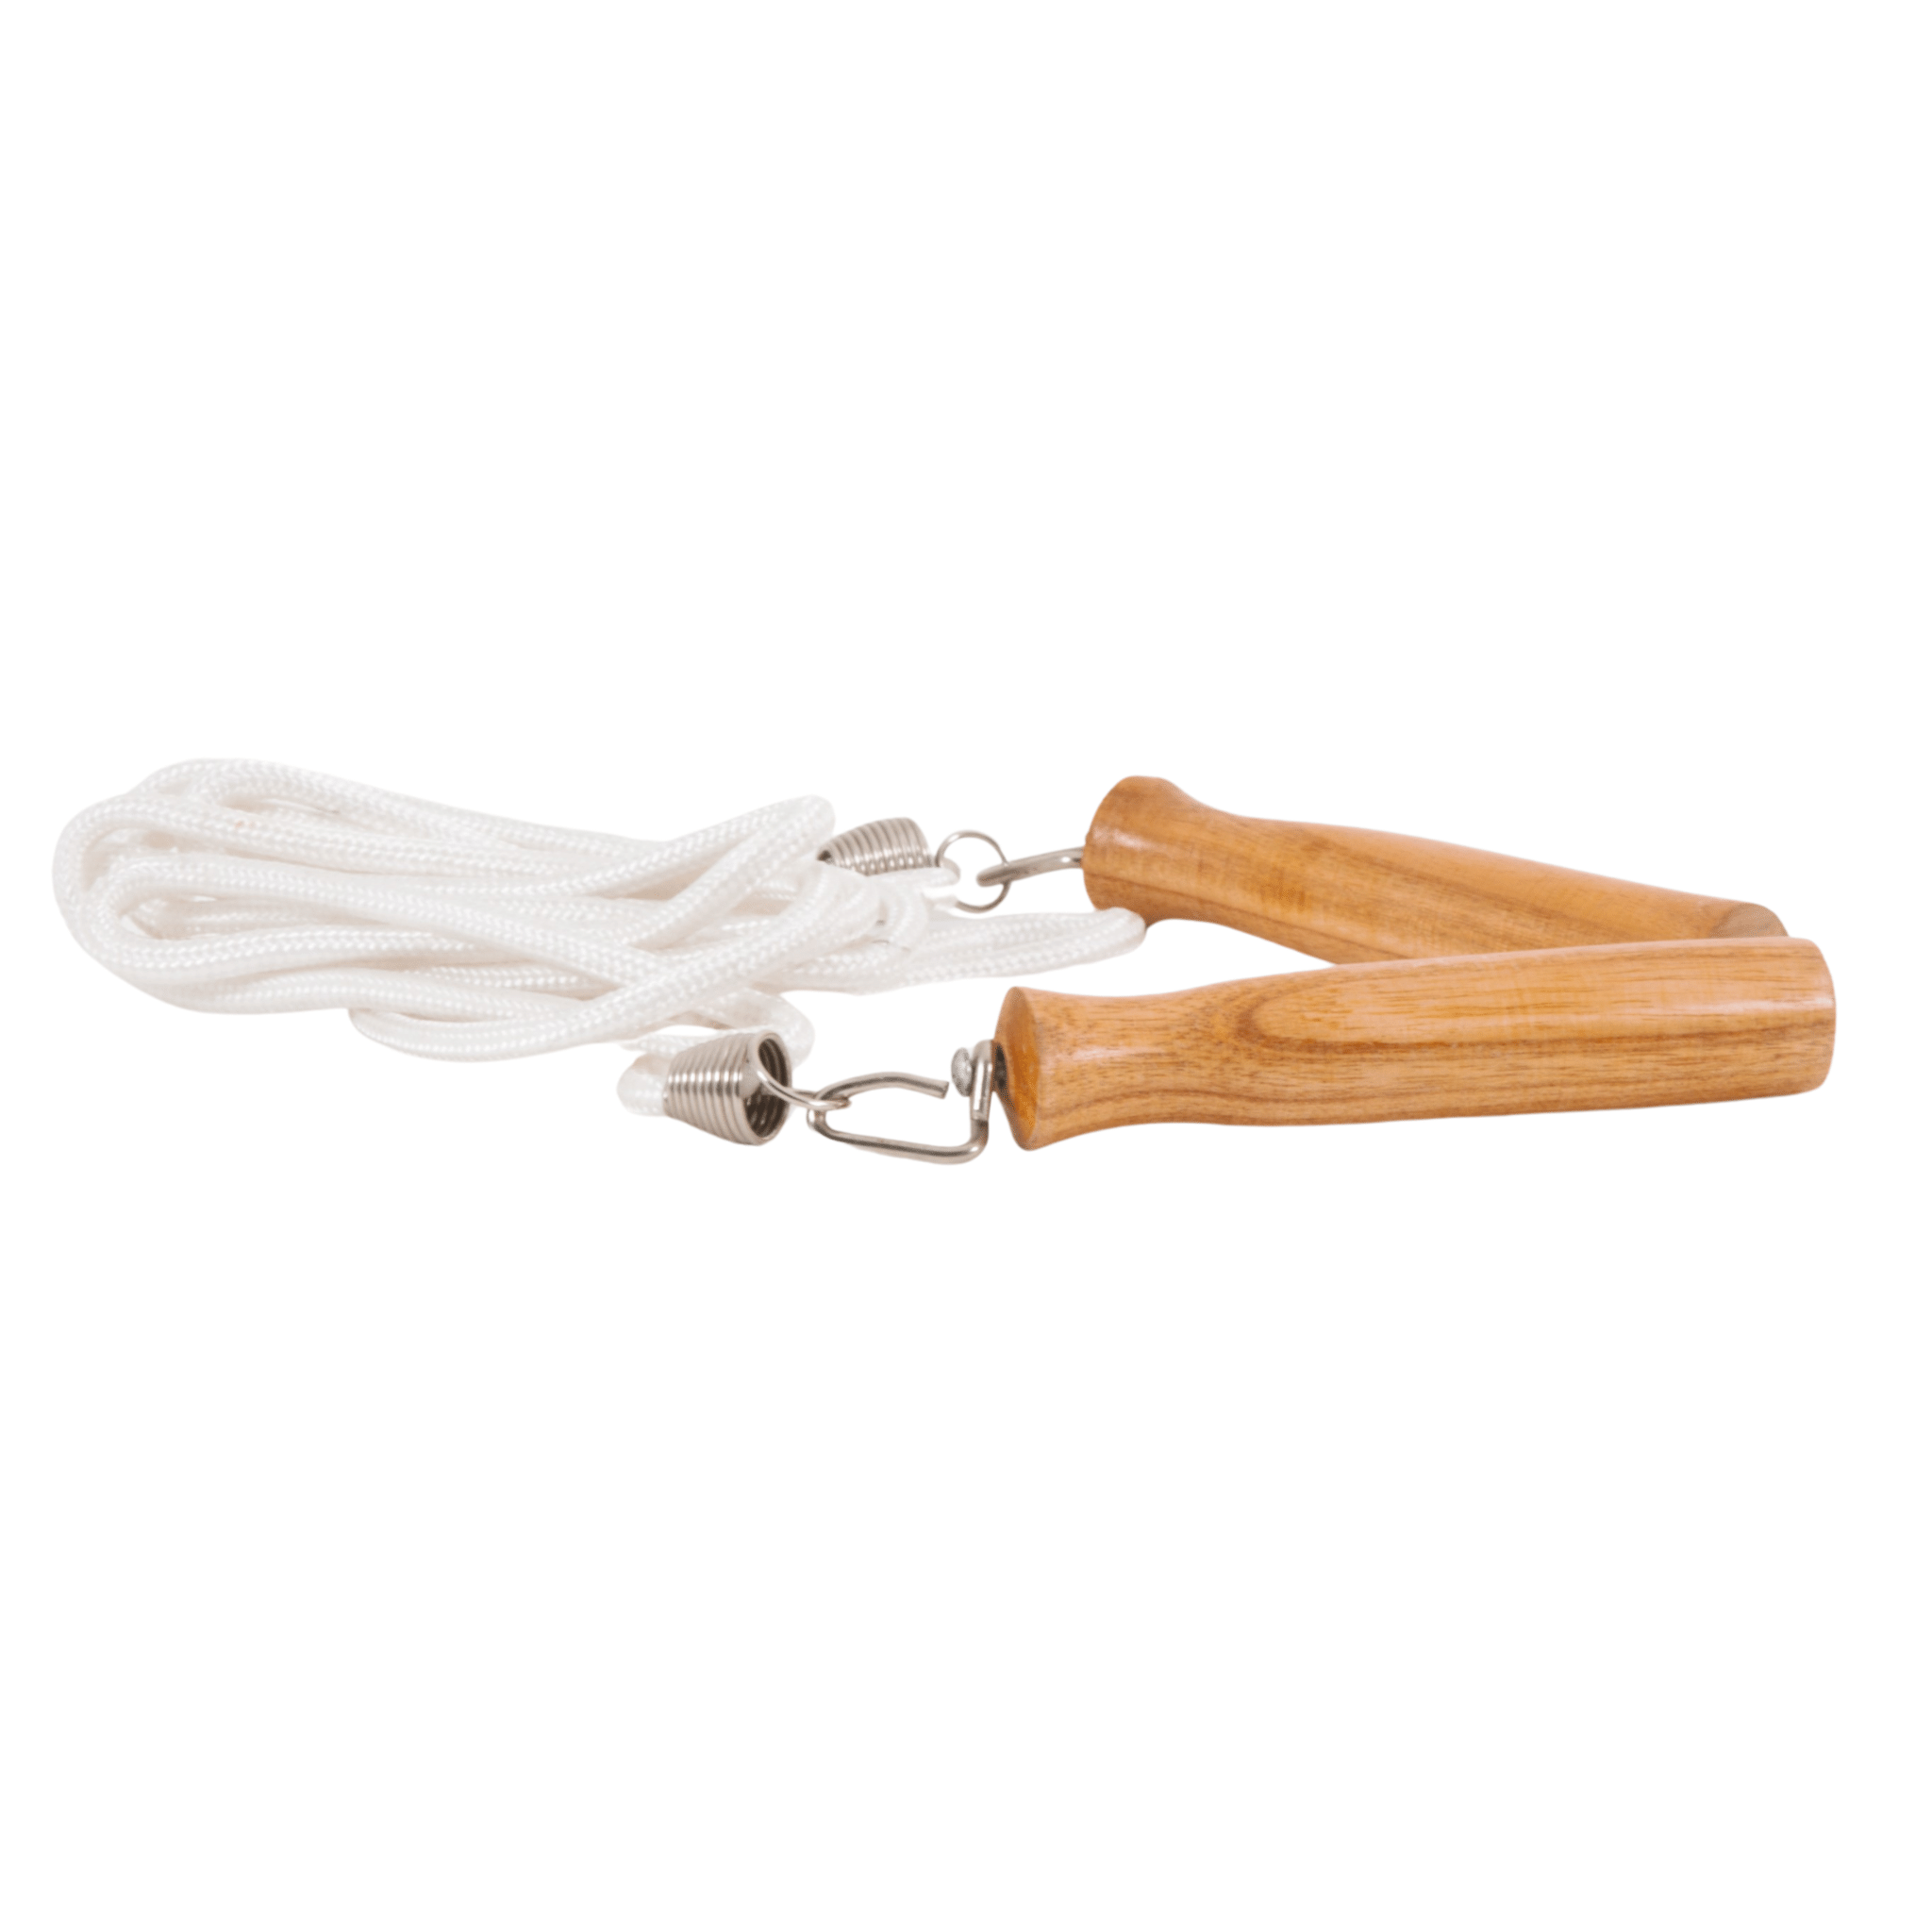 Skipping Rope with white braided cotton cord and turned wooden handles